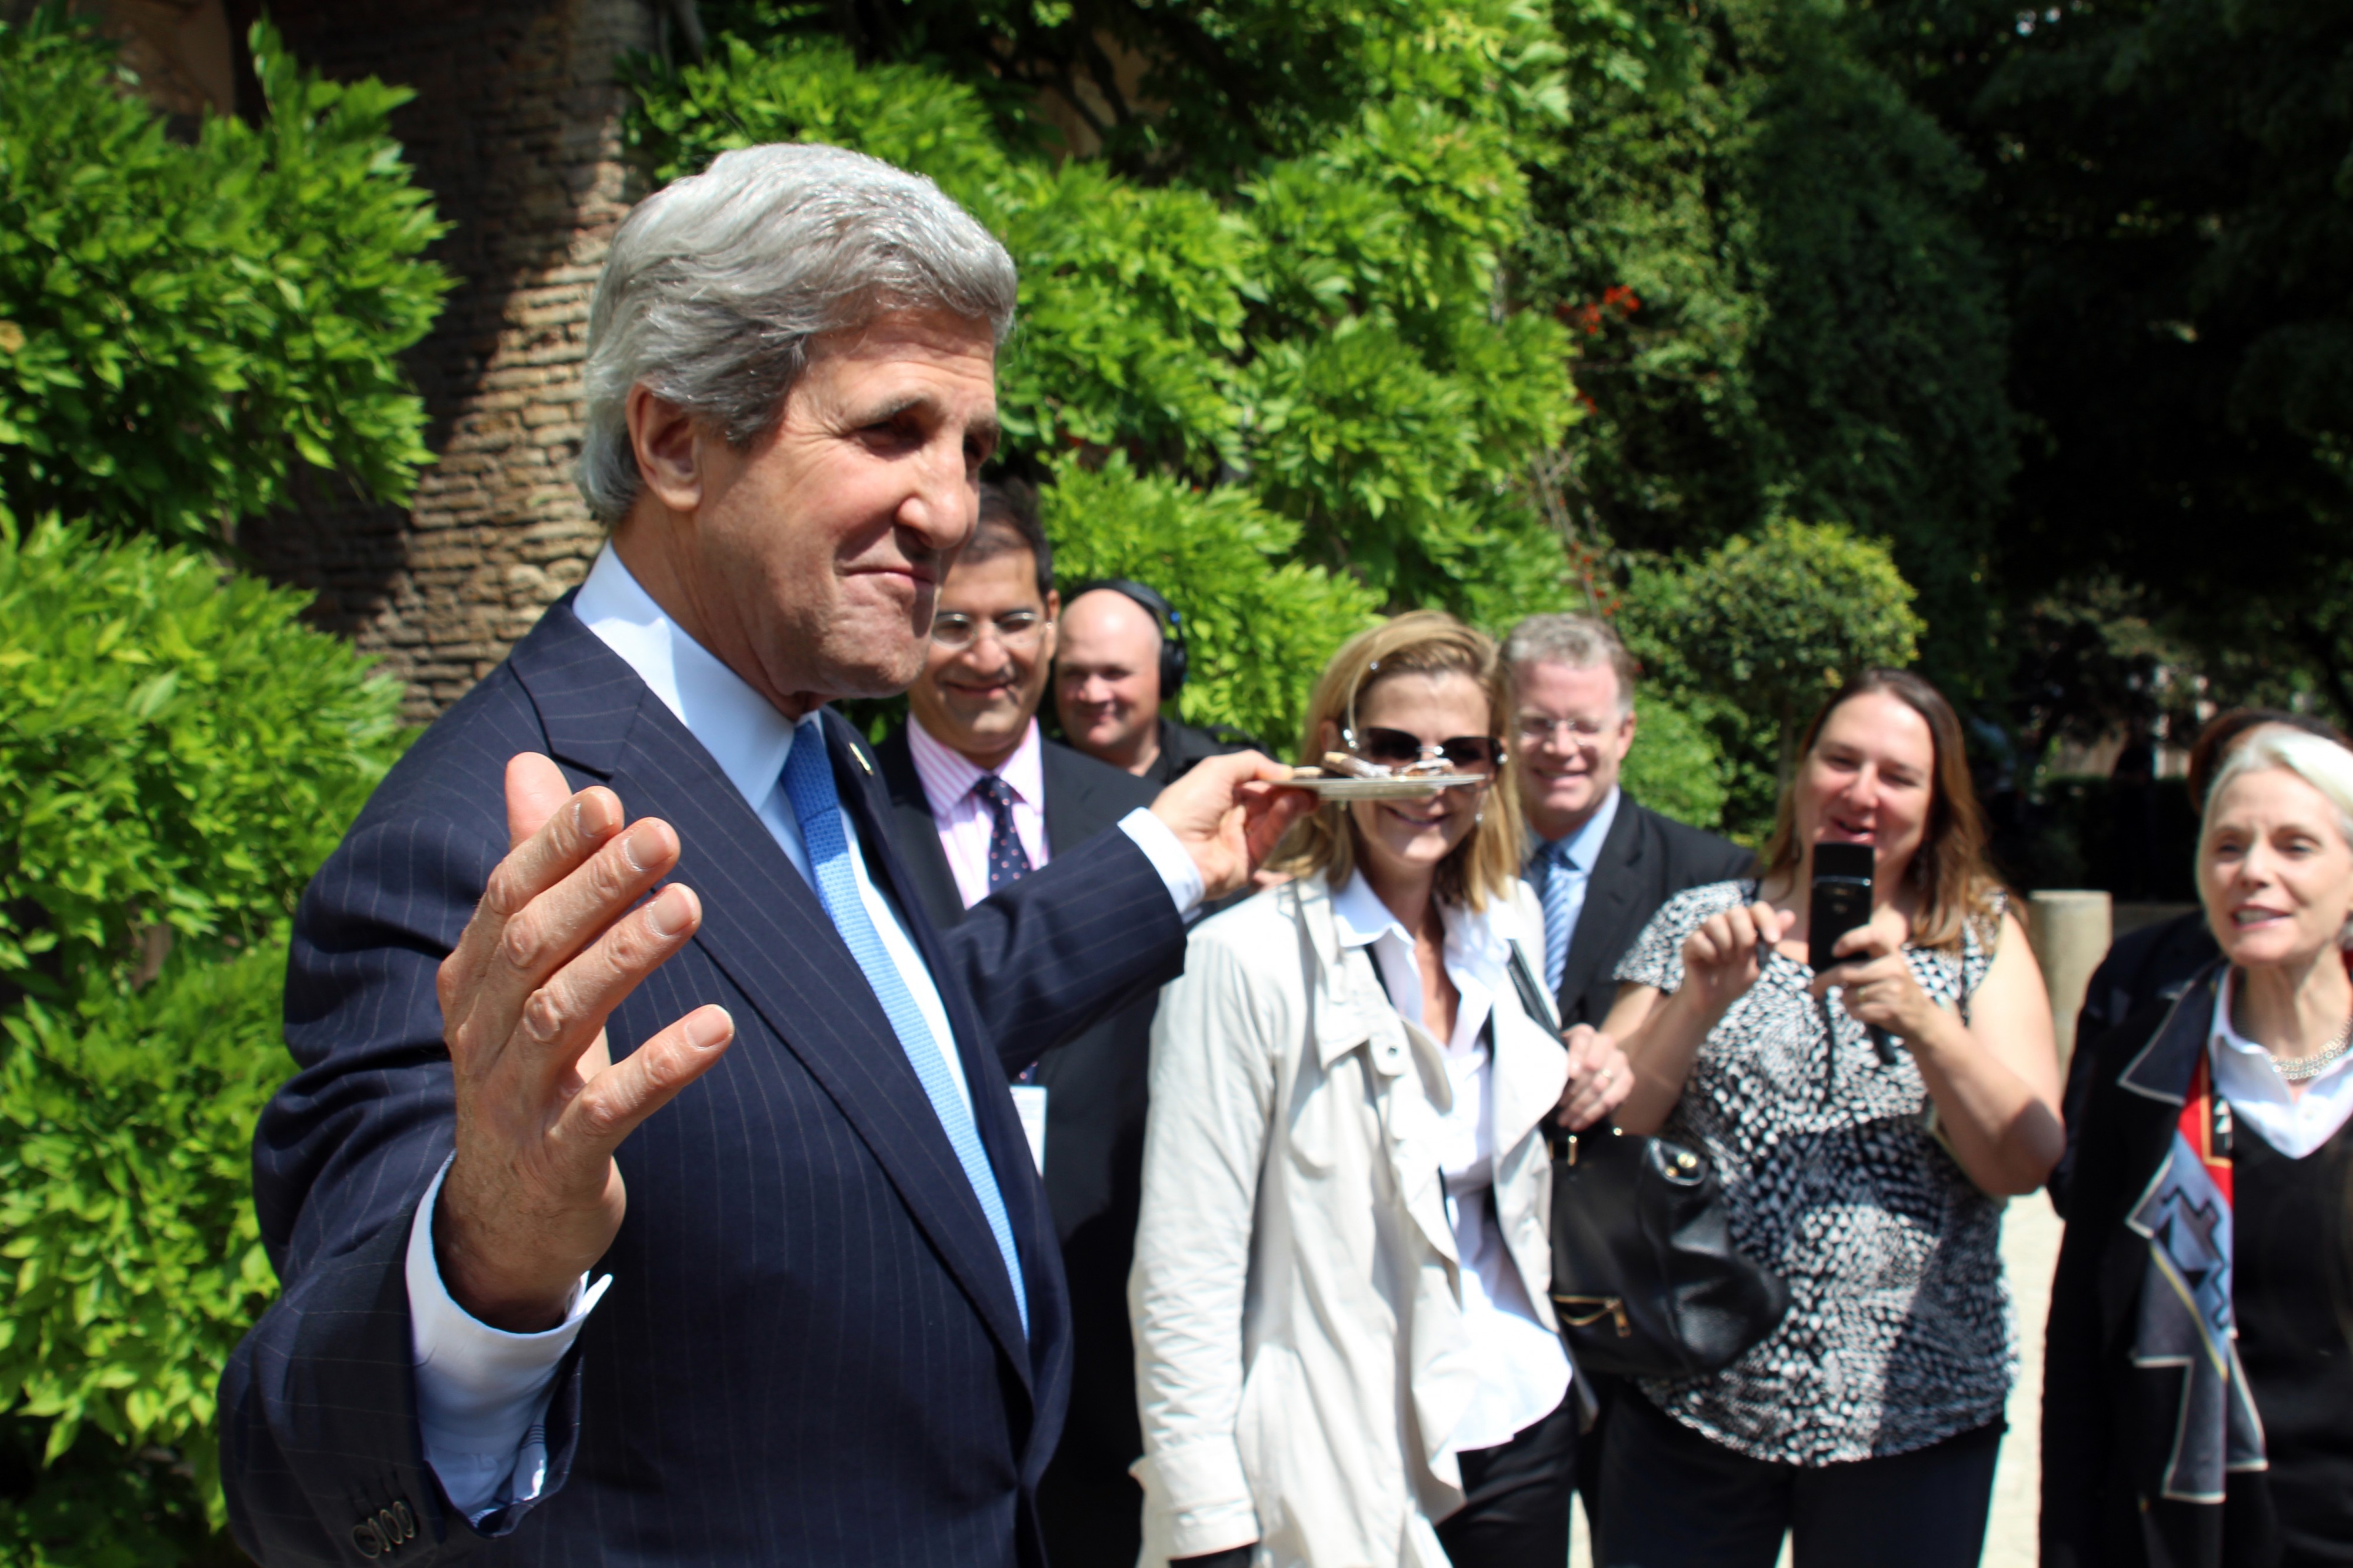 Secretary Kerry Shares Italian Cookies With the Traveling Press Corps